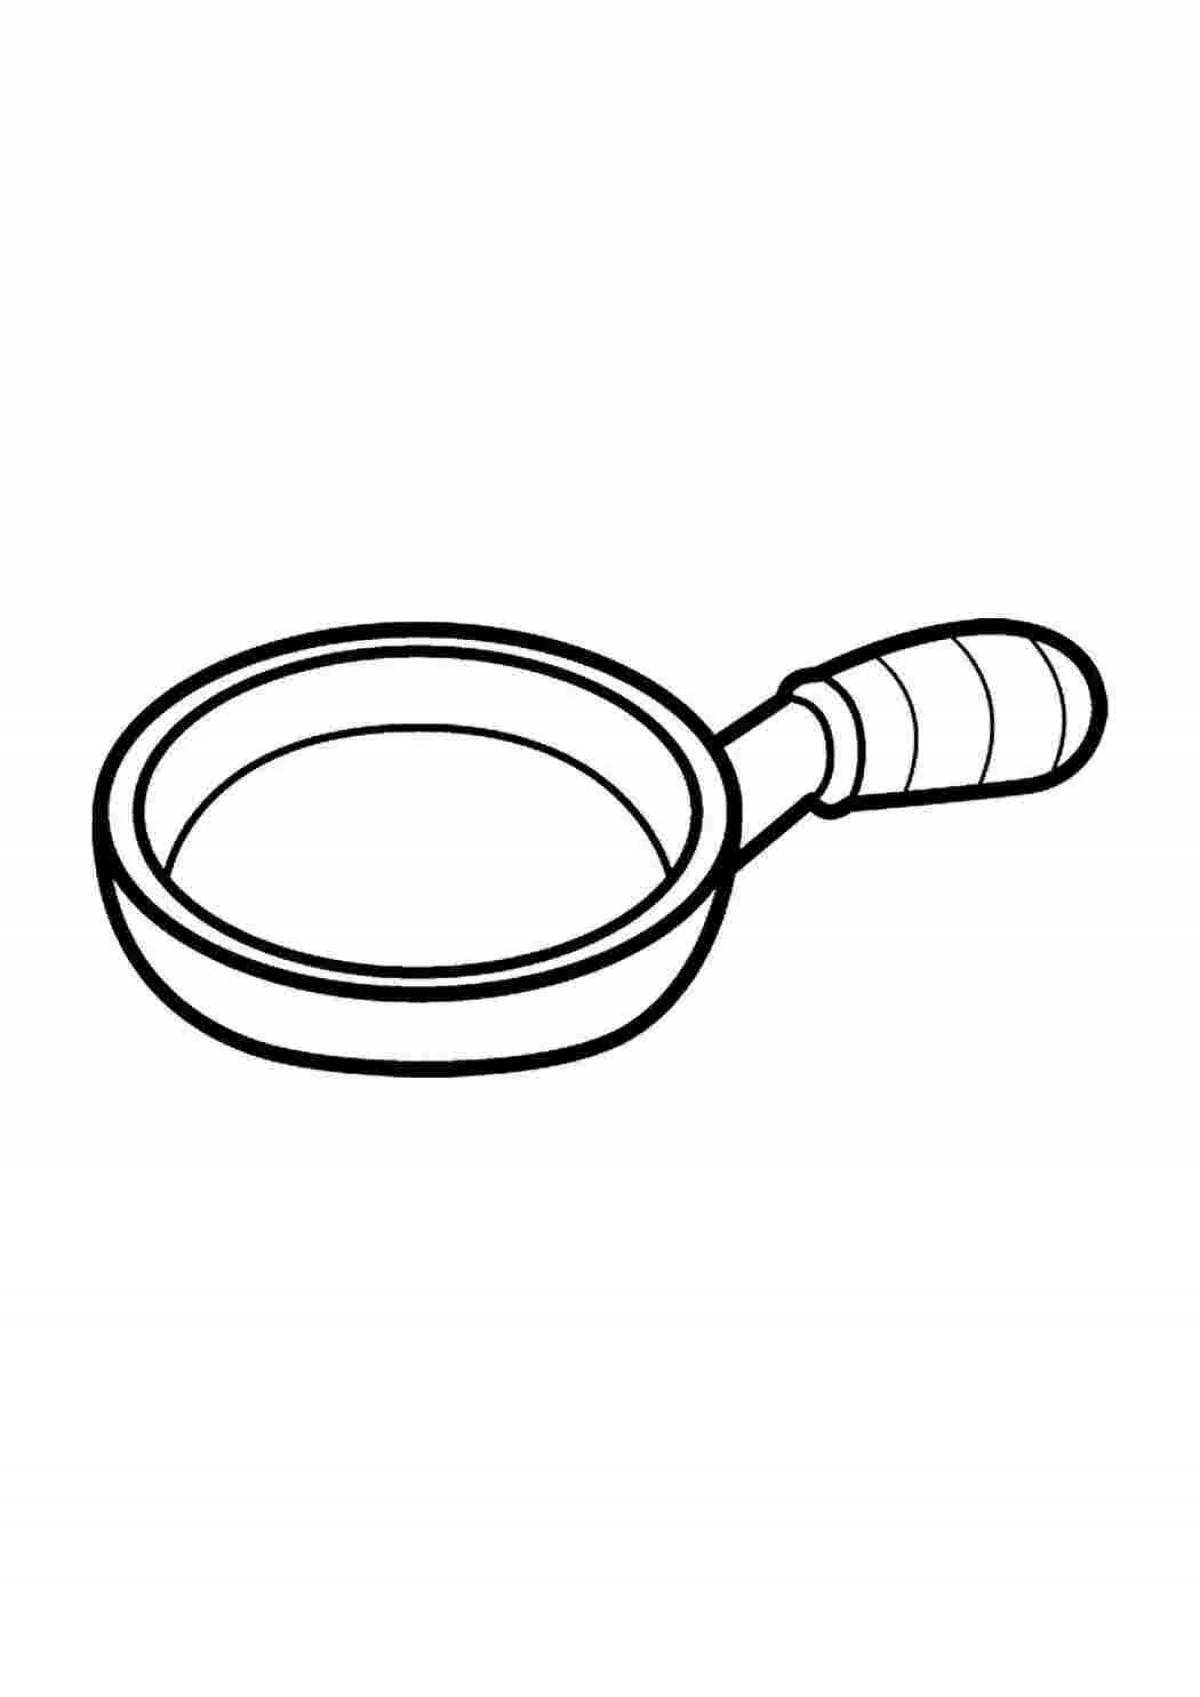 Outstanding frying pan coloring page for 3-4 year olds